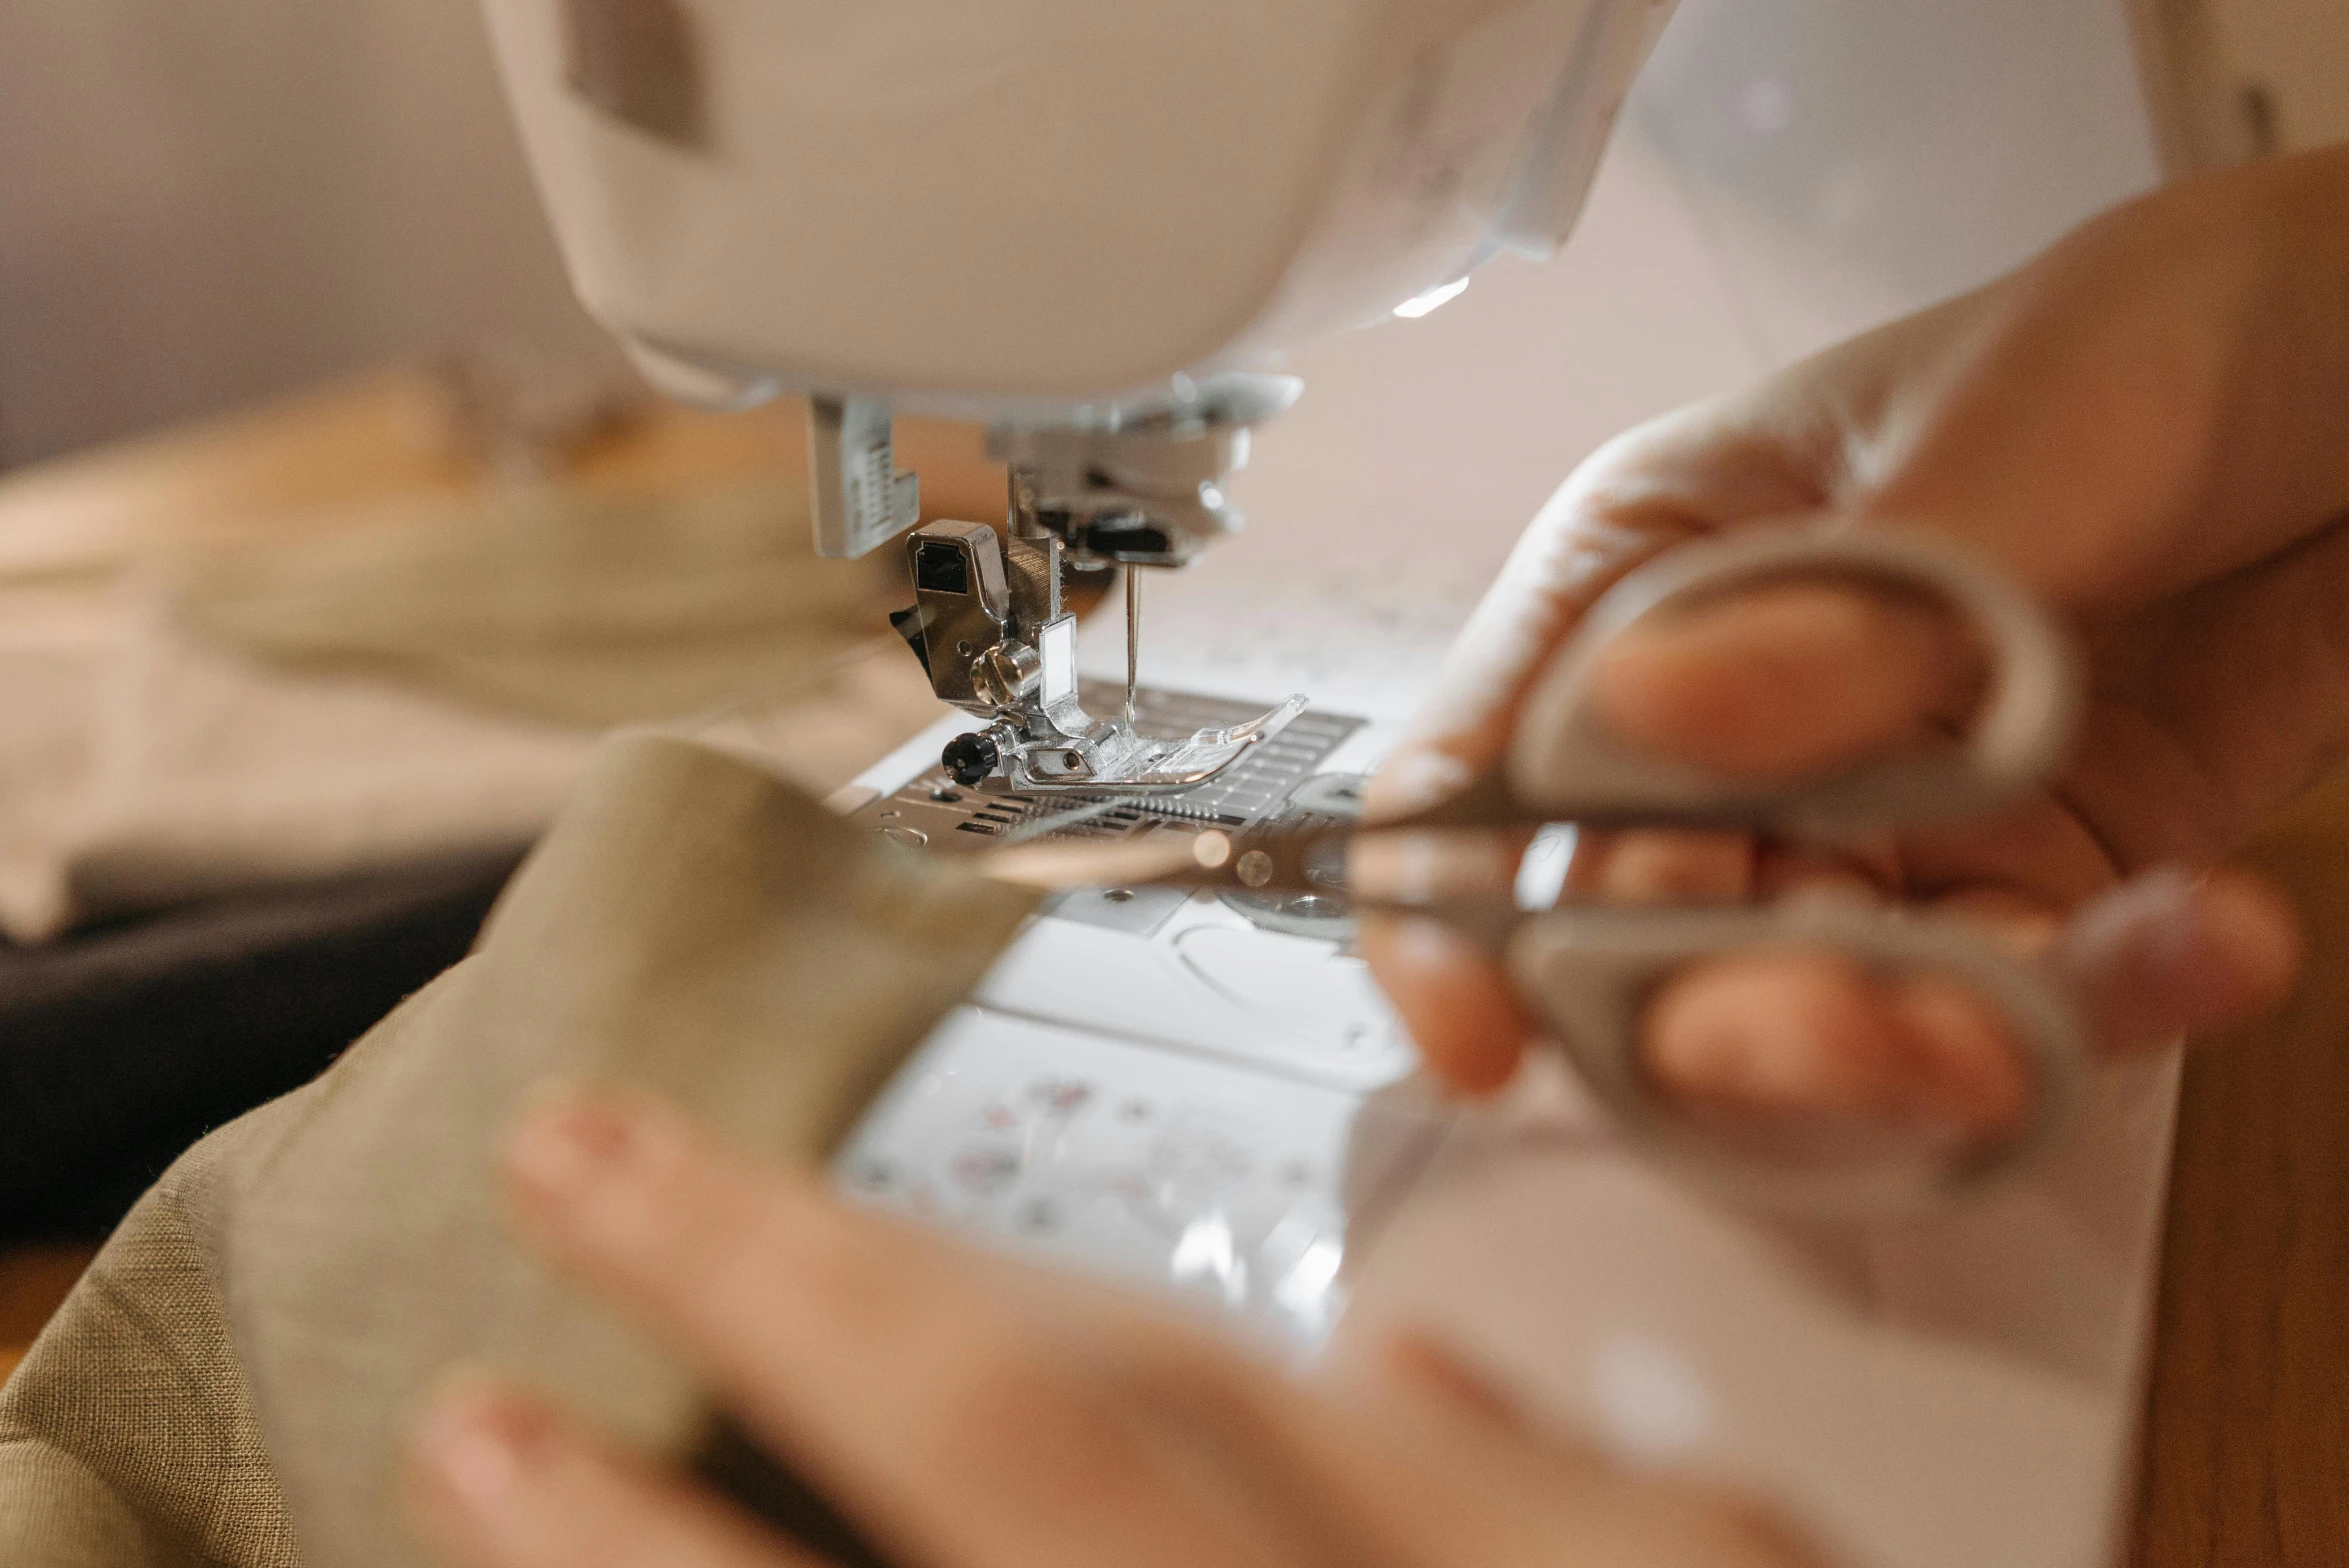 a person working on sewing fabric